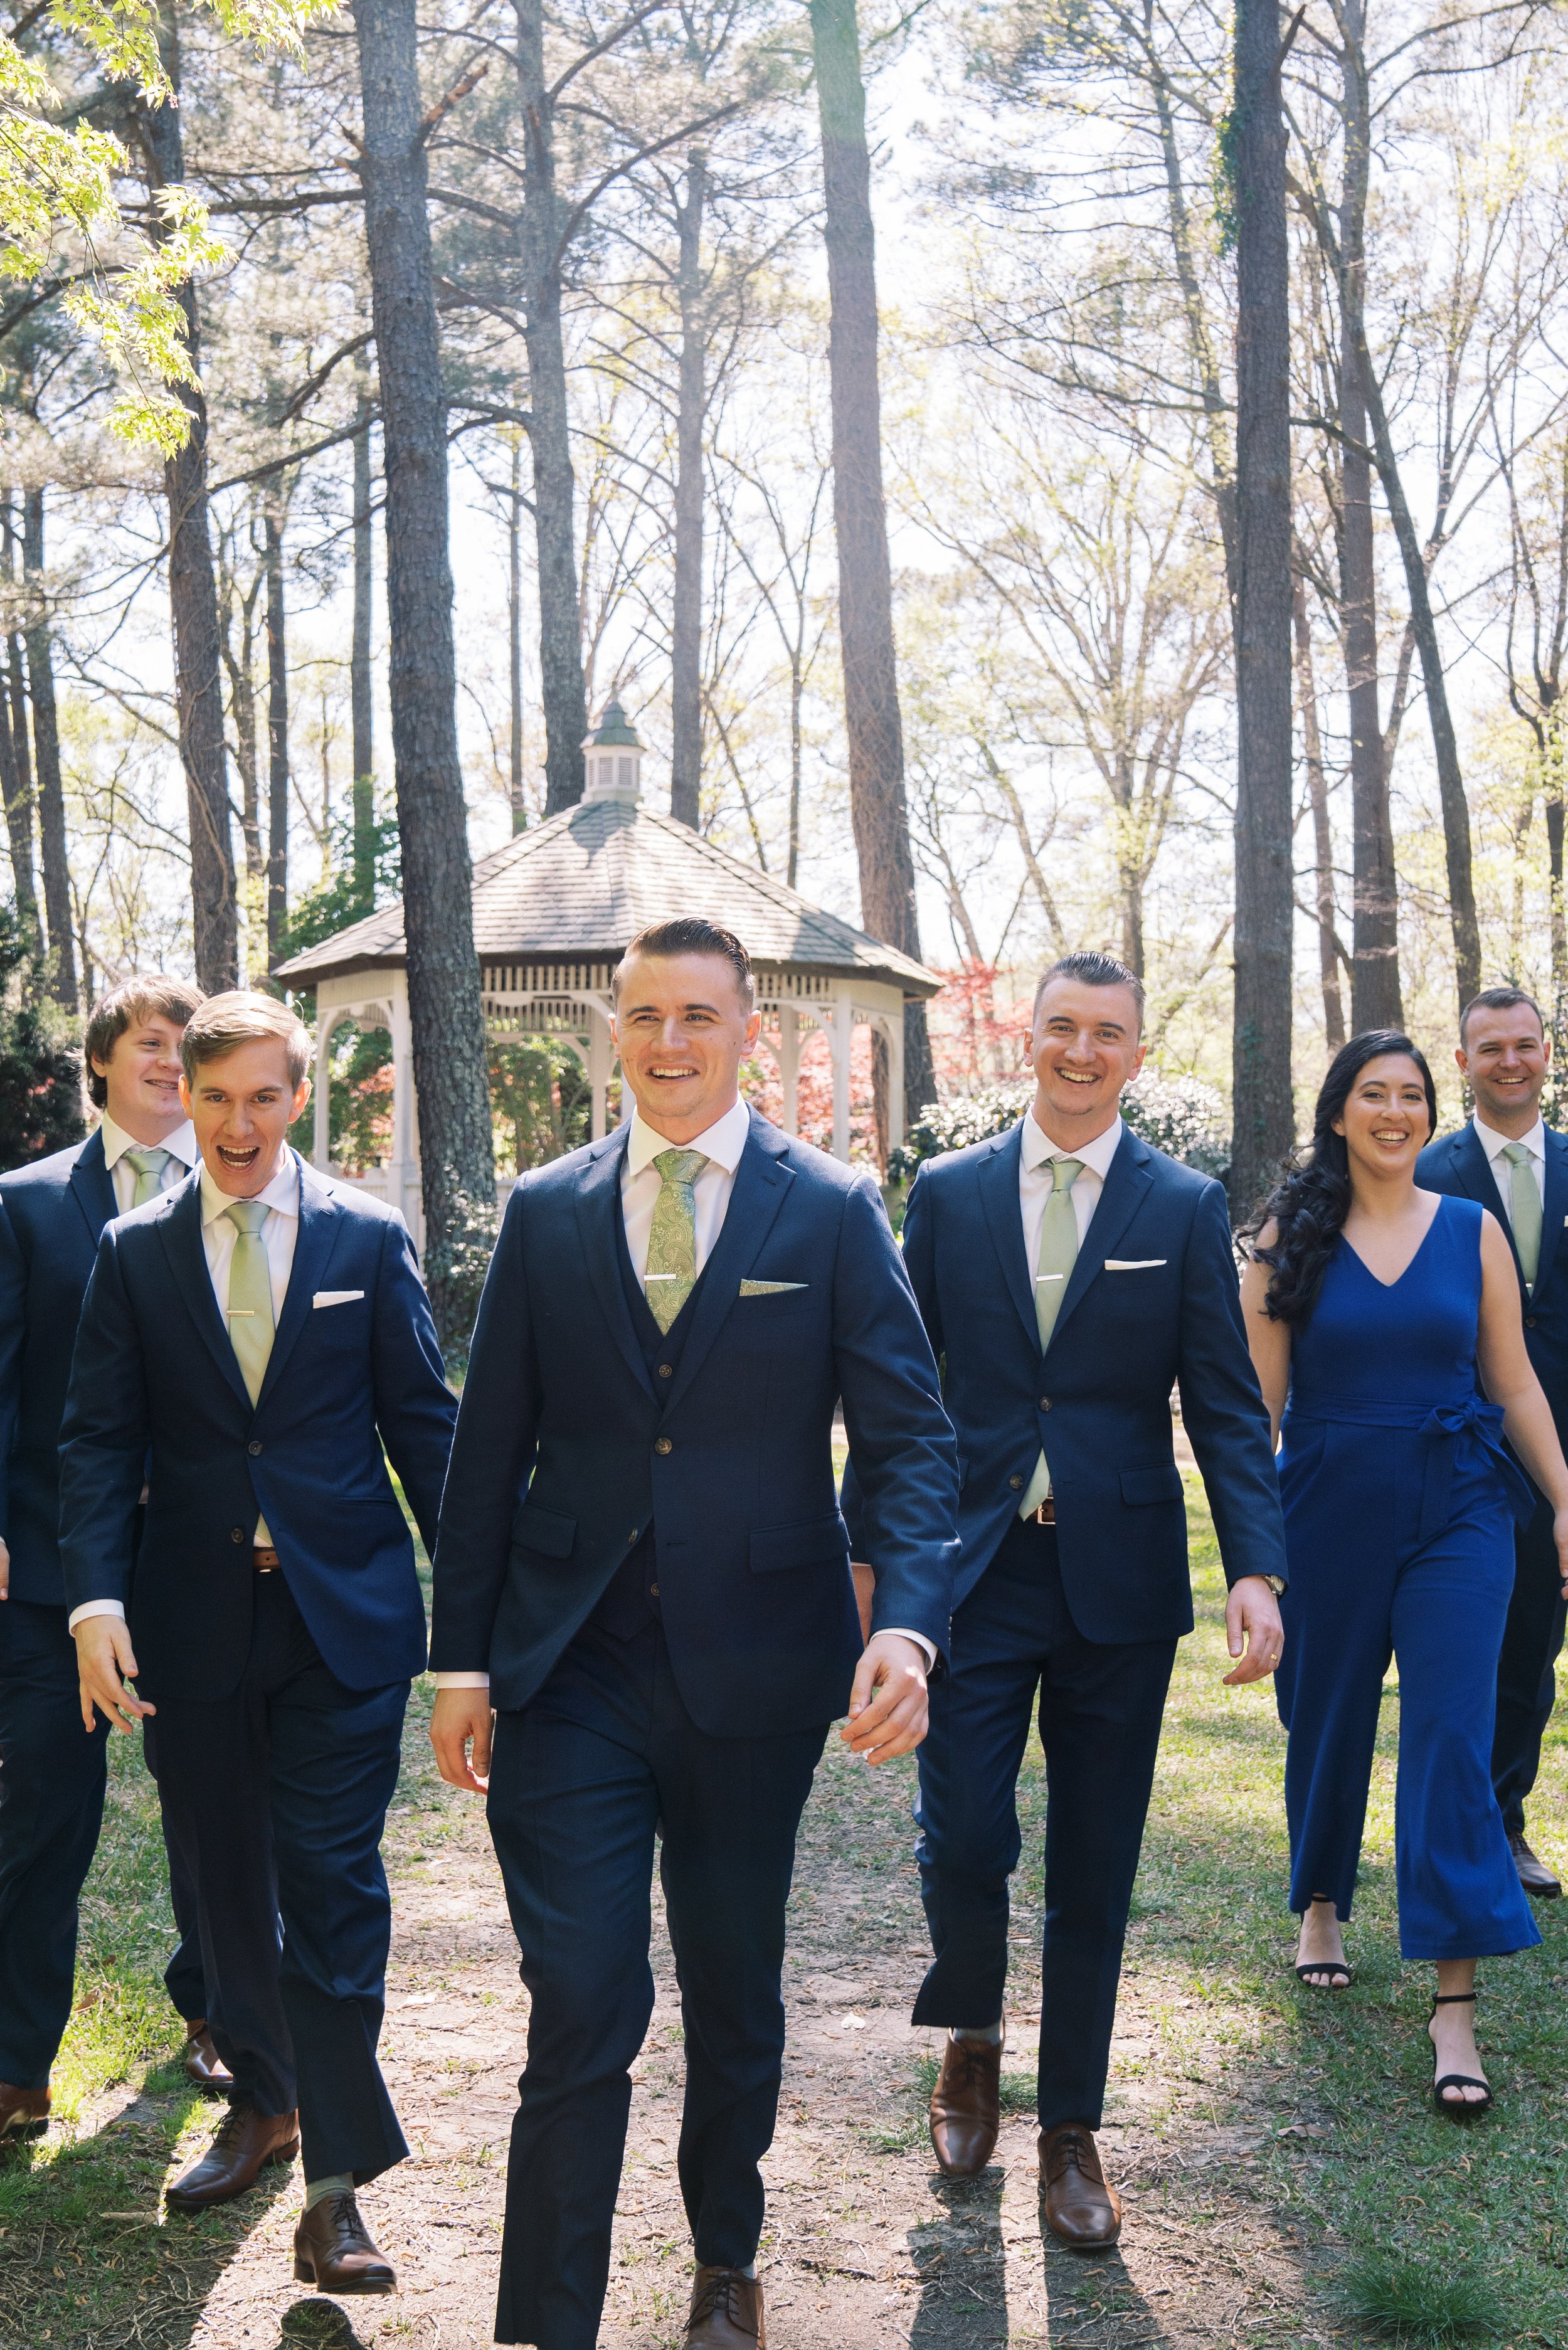 Cool Grooms Party Walk Cape Fear Botanical Garden Wedding Fancy This Photography